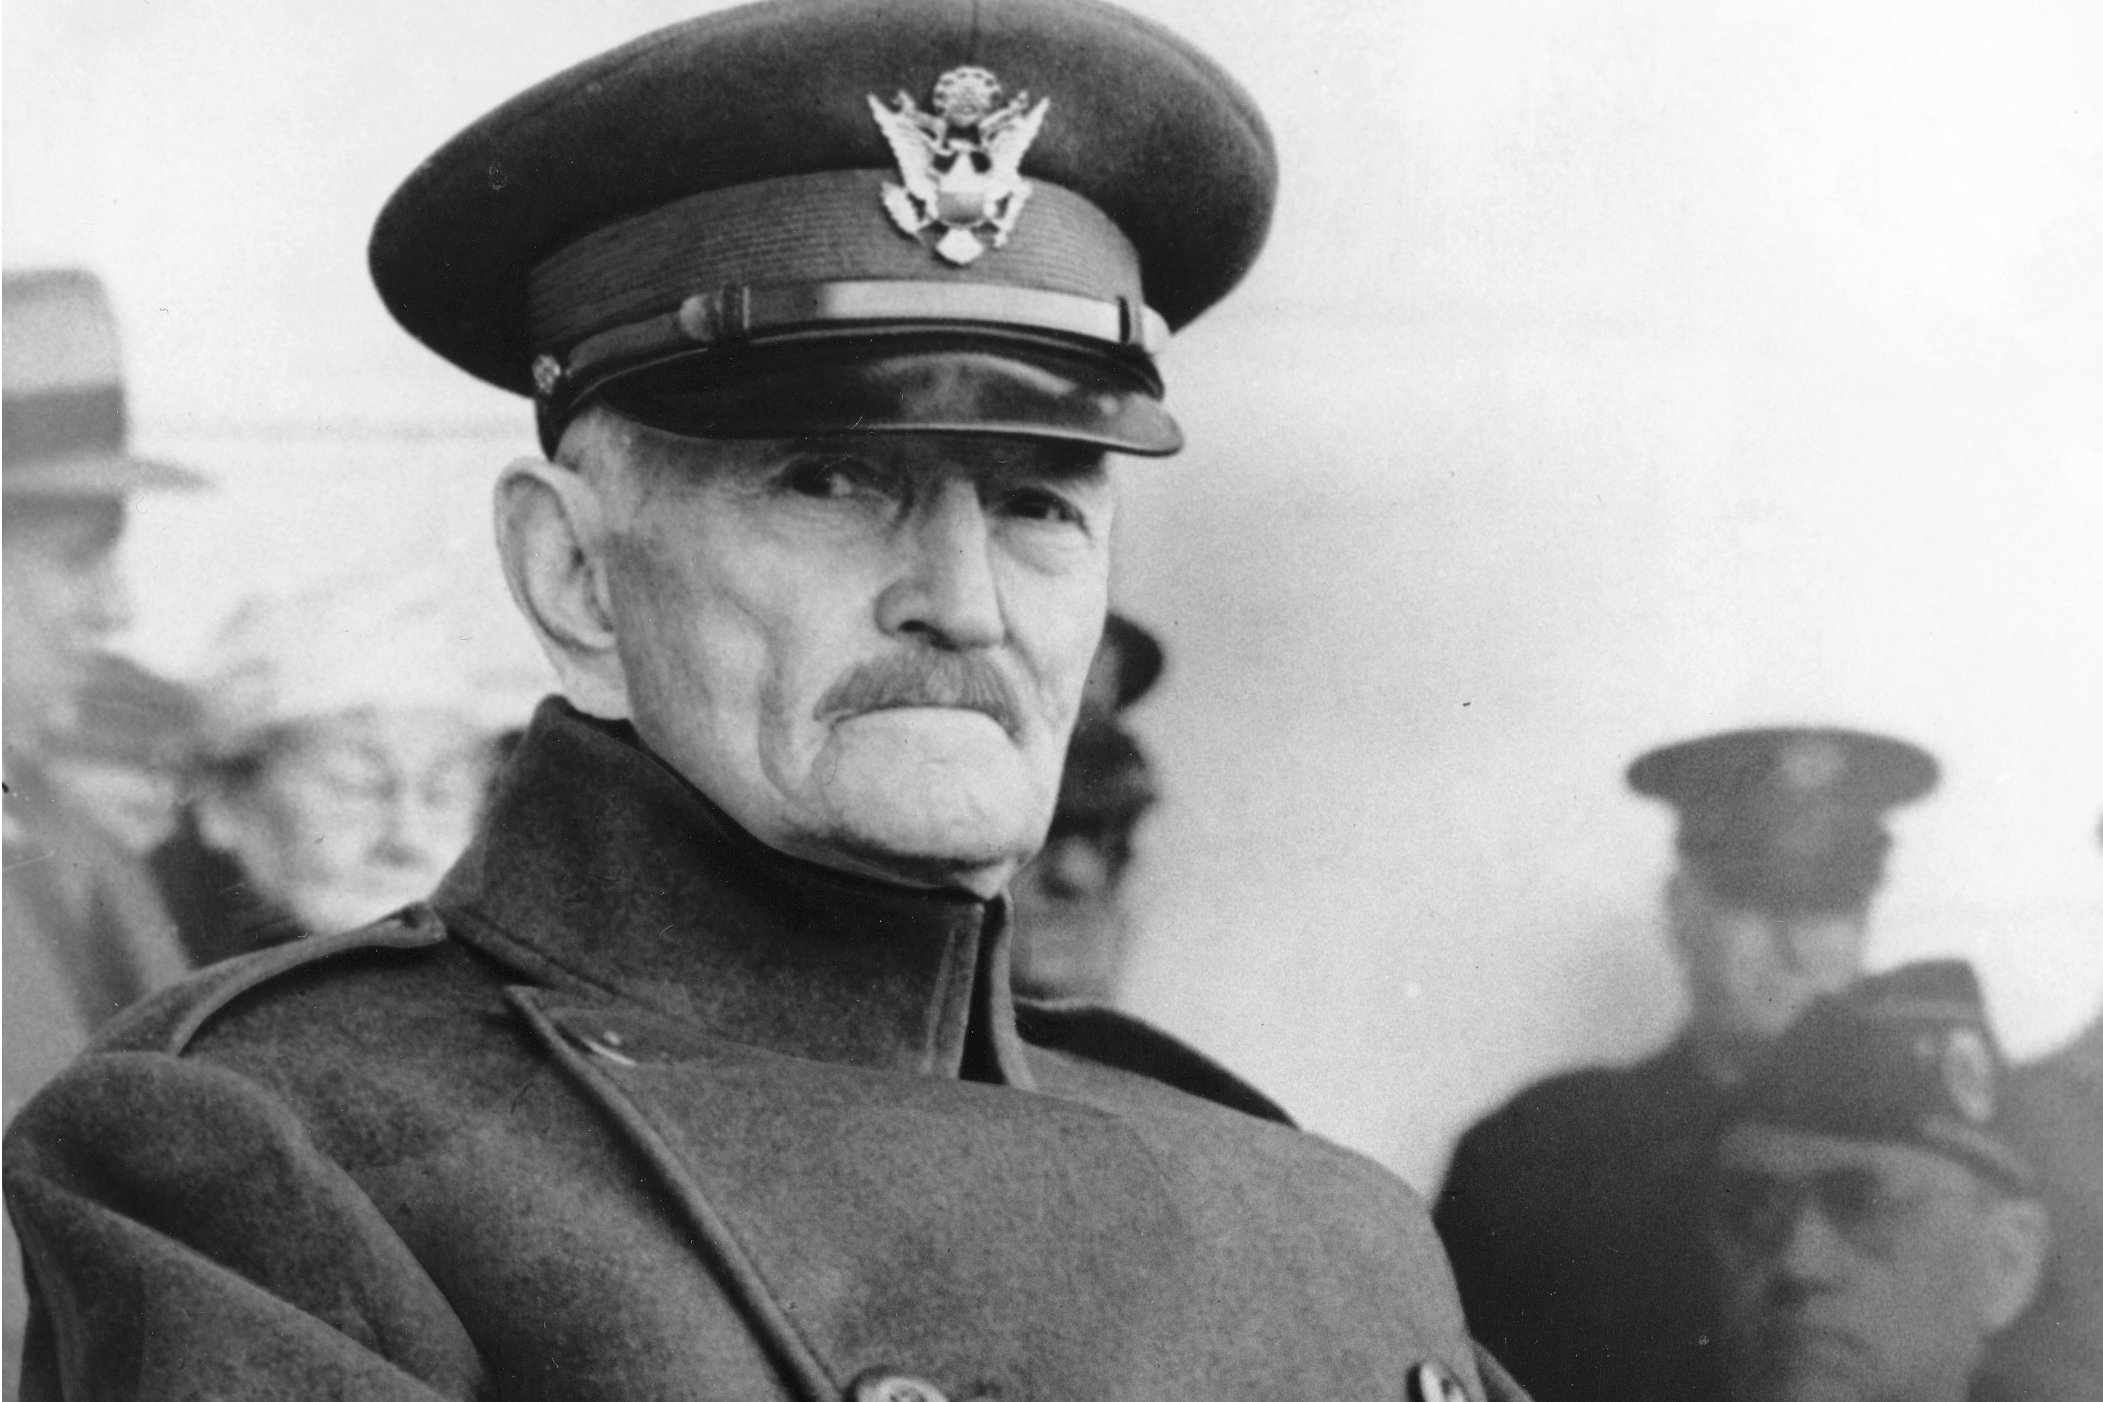 John J. Pershing appears in uniform at Armistice Day, 1942